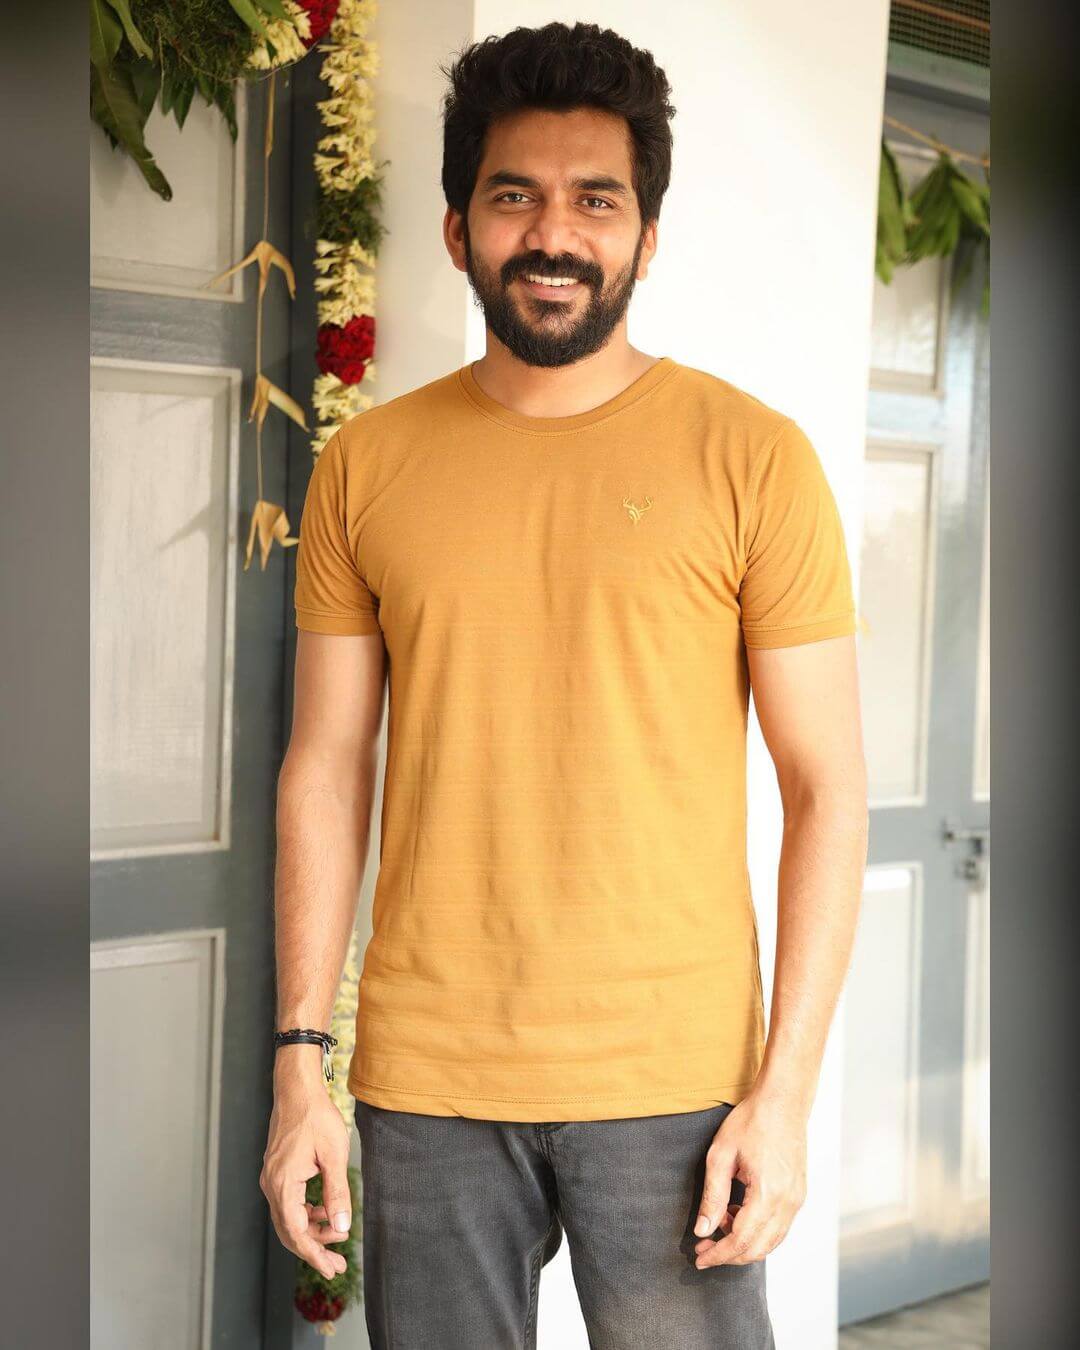 Actor Kavin close up in yellow tshirt